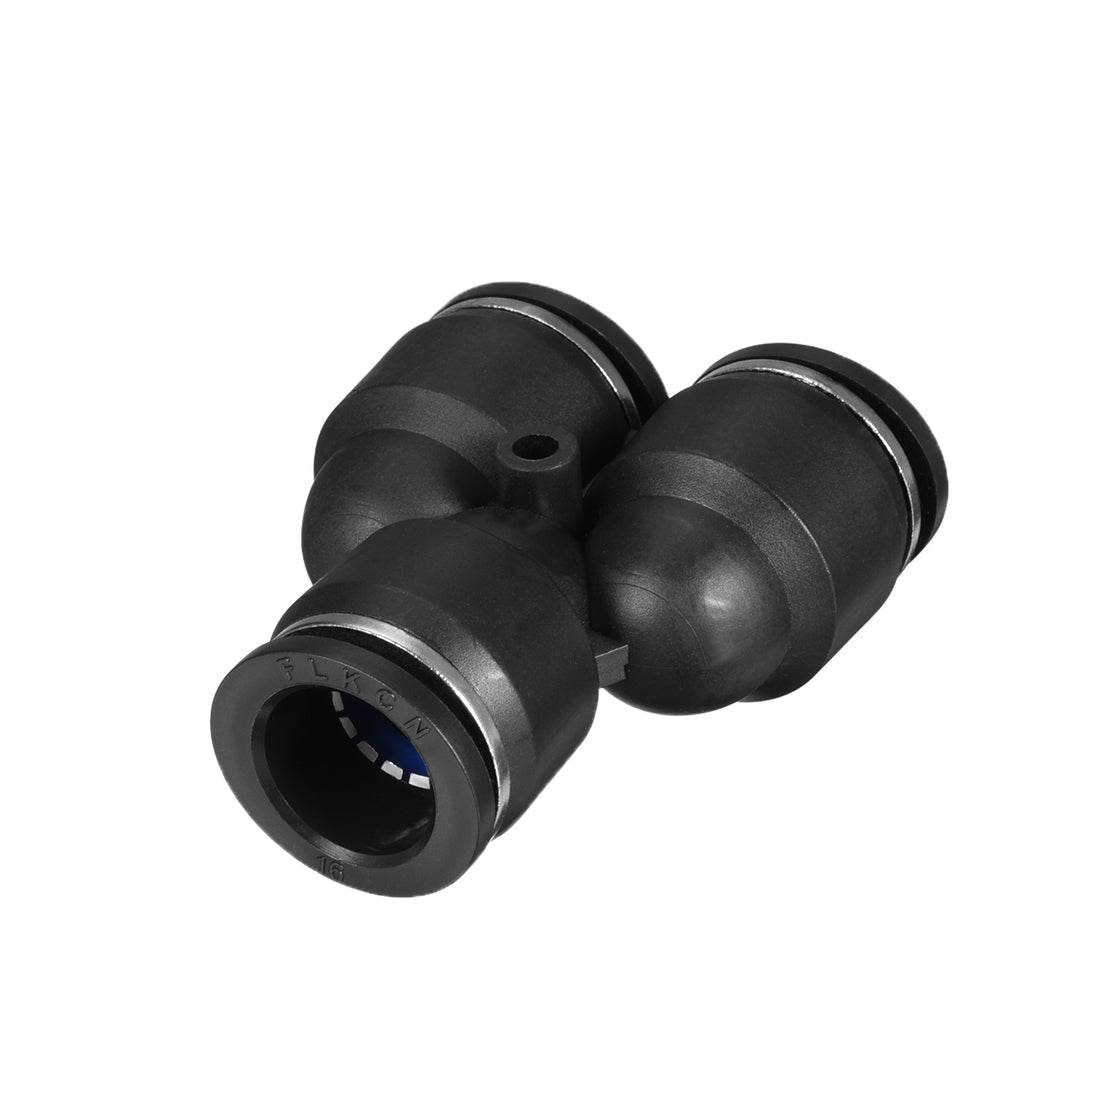 uxcell Uxcell 4pcs Push To Connect Fittings Y Type Tube Connect 16 mm or 5/8'' od Push Fit Fittings Tube Fittings Push Lock Black(16mm Y tee)